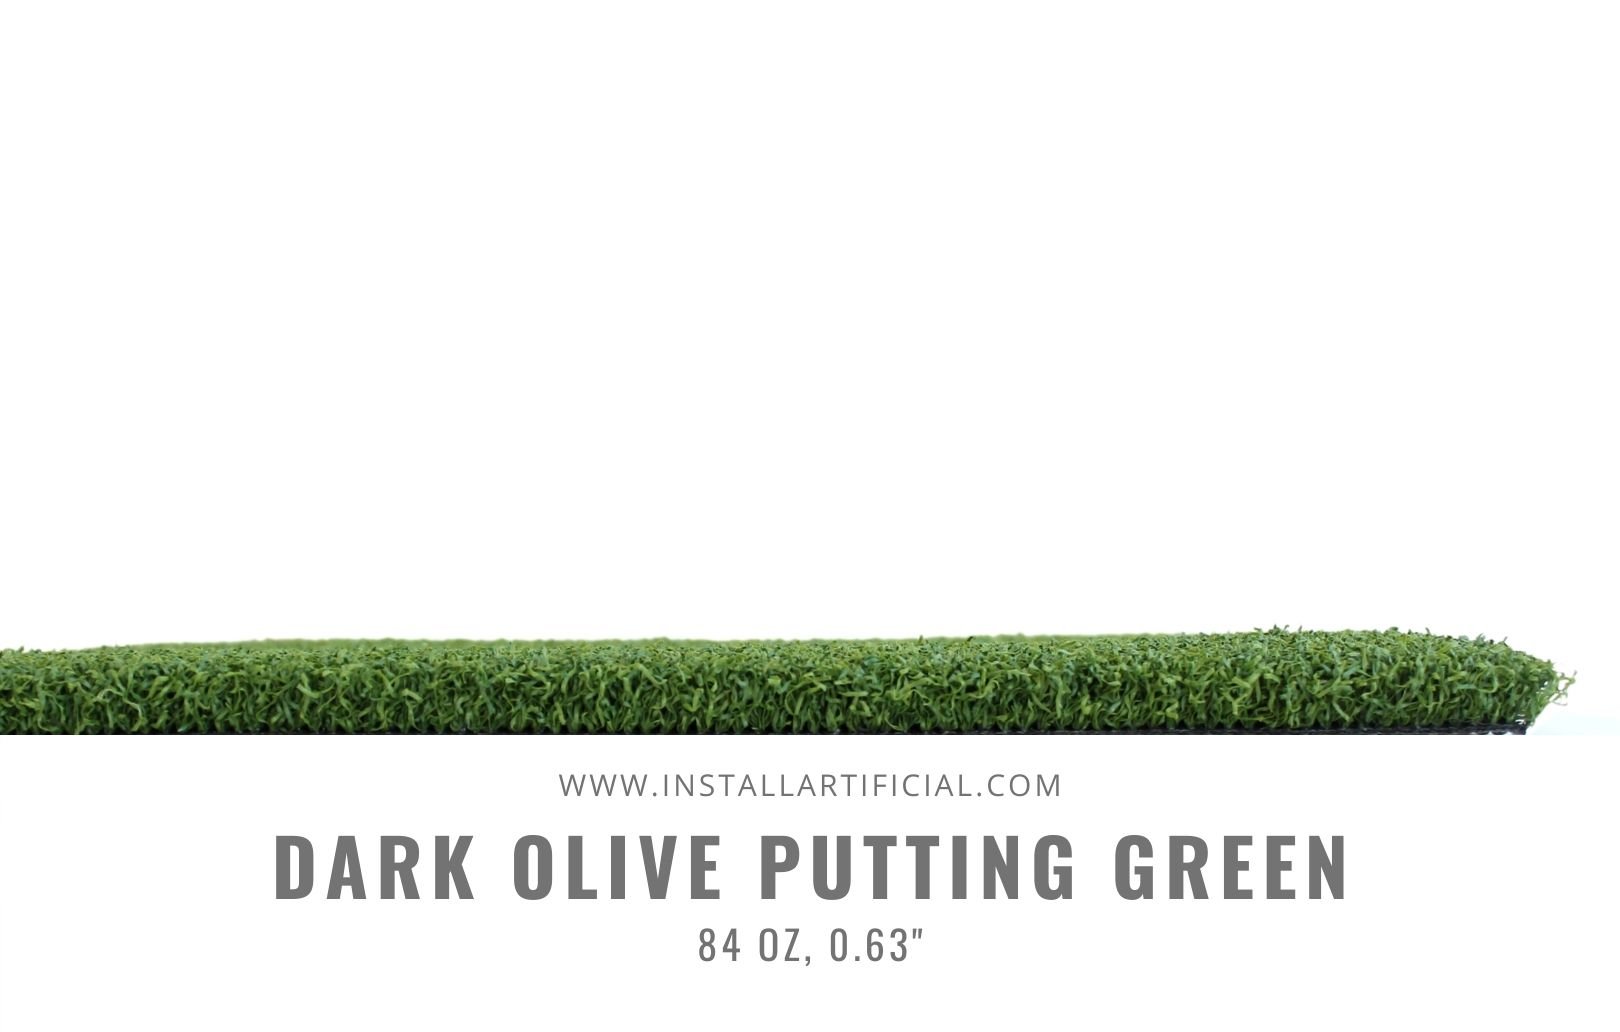 Dark Olive Putting Green, Purchase Green, Side